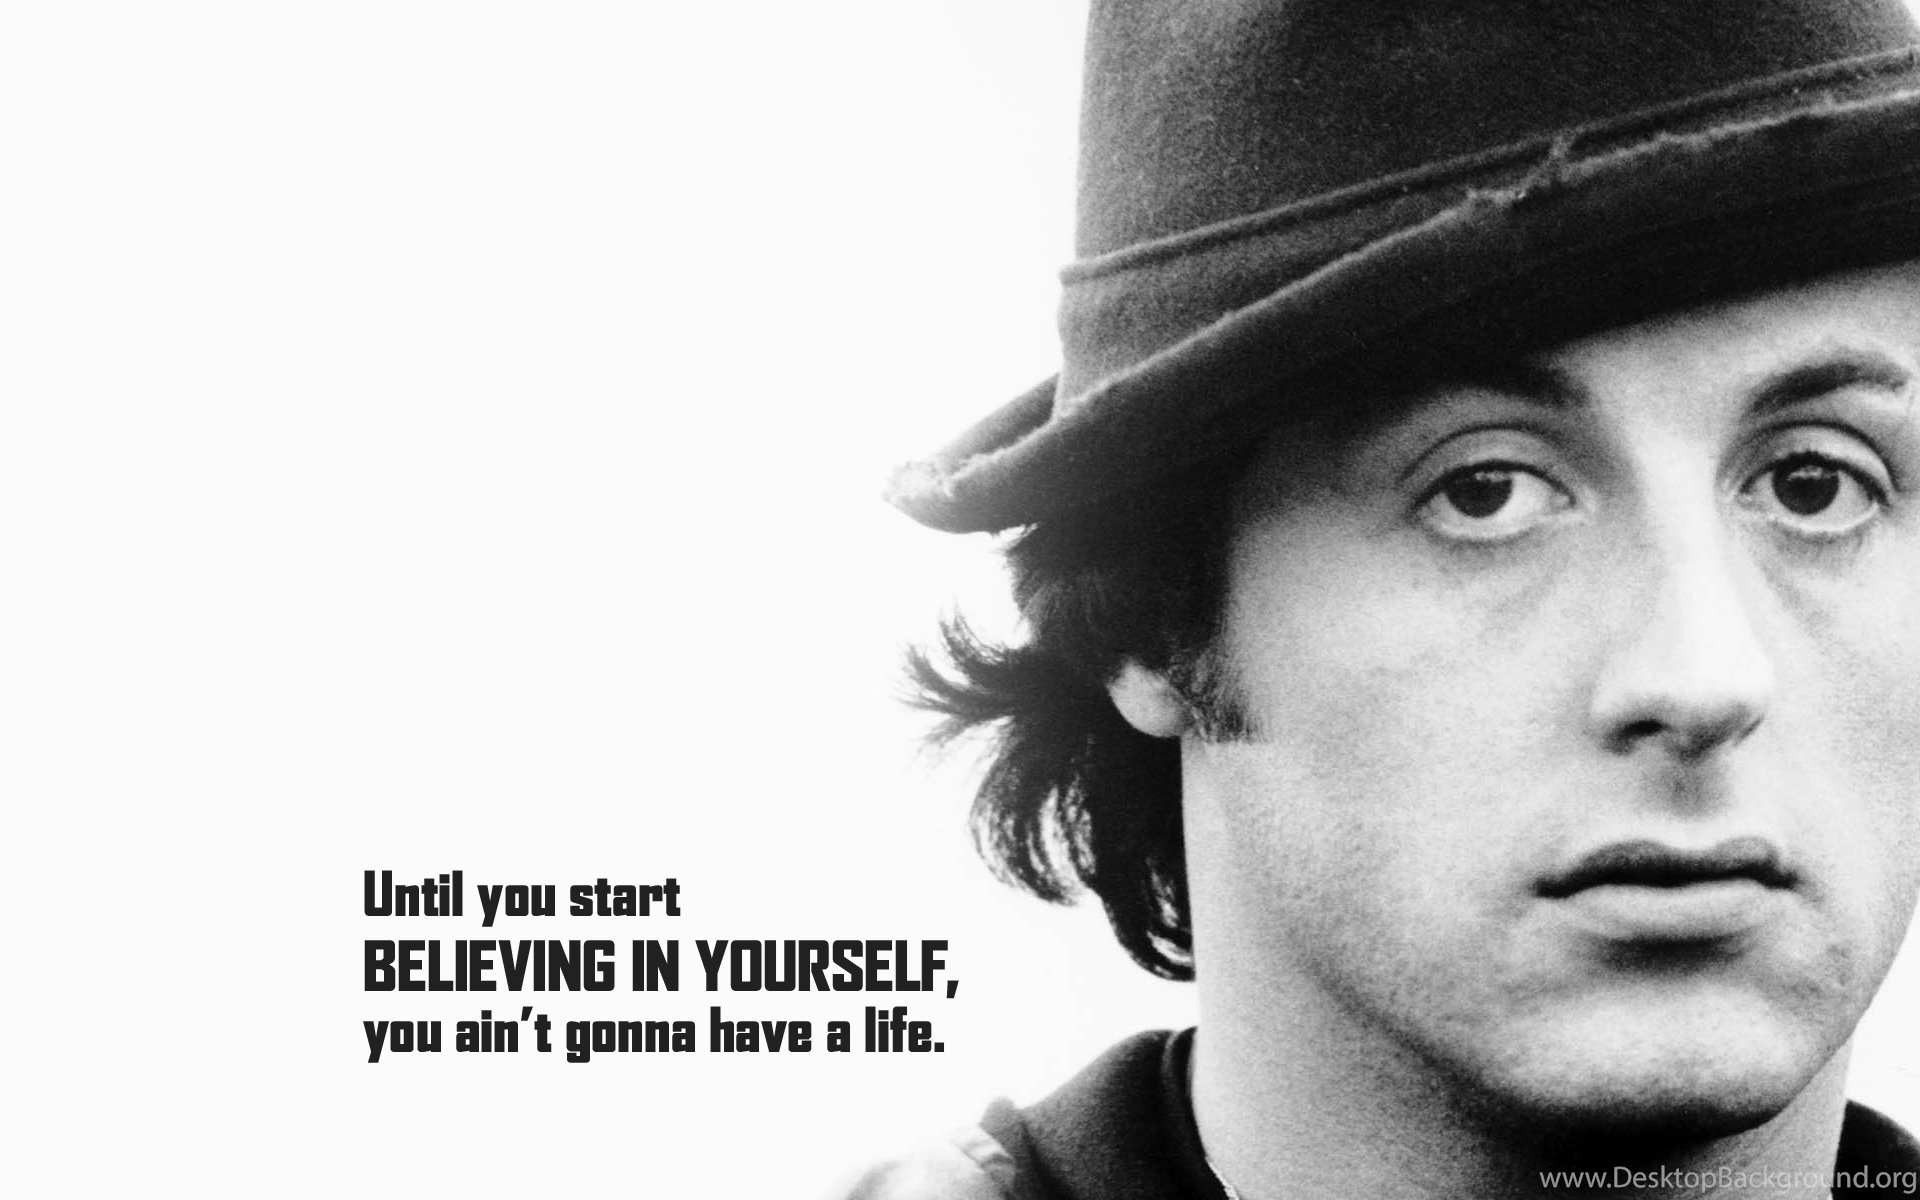 Movowall Rocky Balboa Quote - Sylvester Stallone , HD Wallpaper & Backgrounds